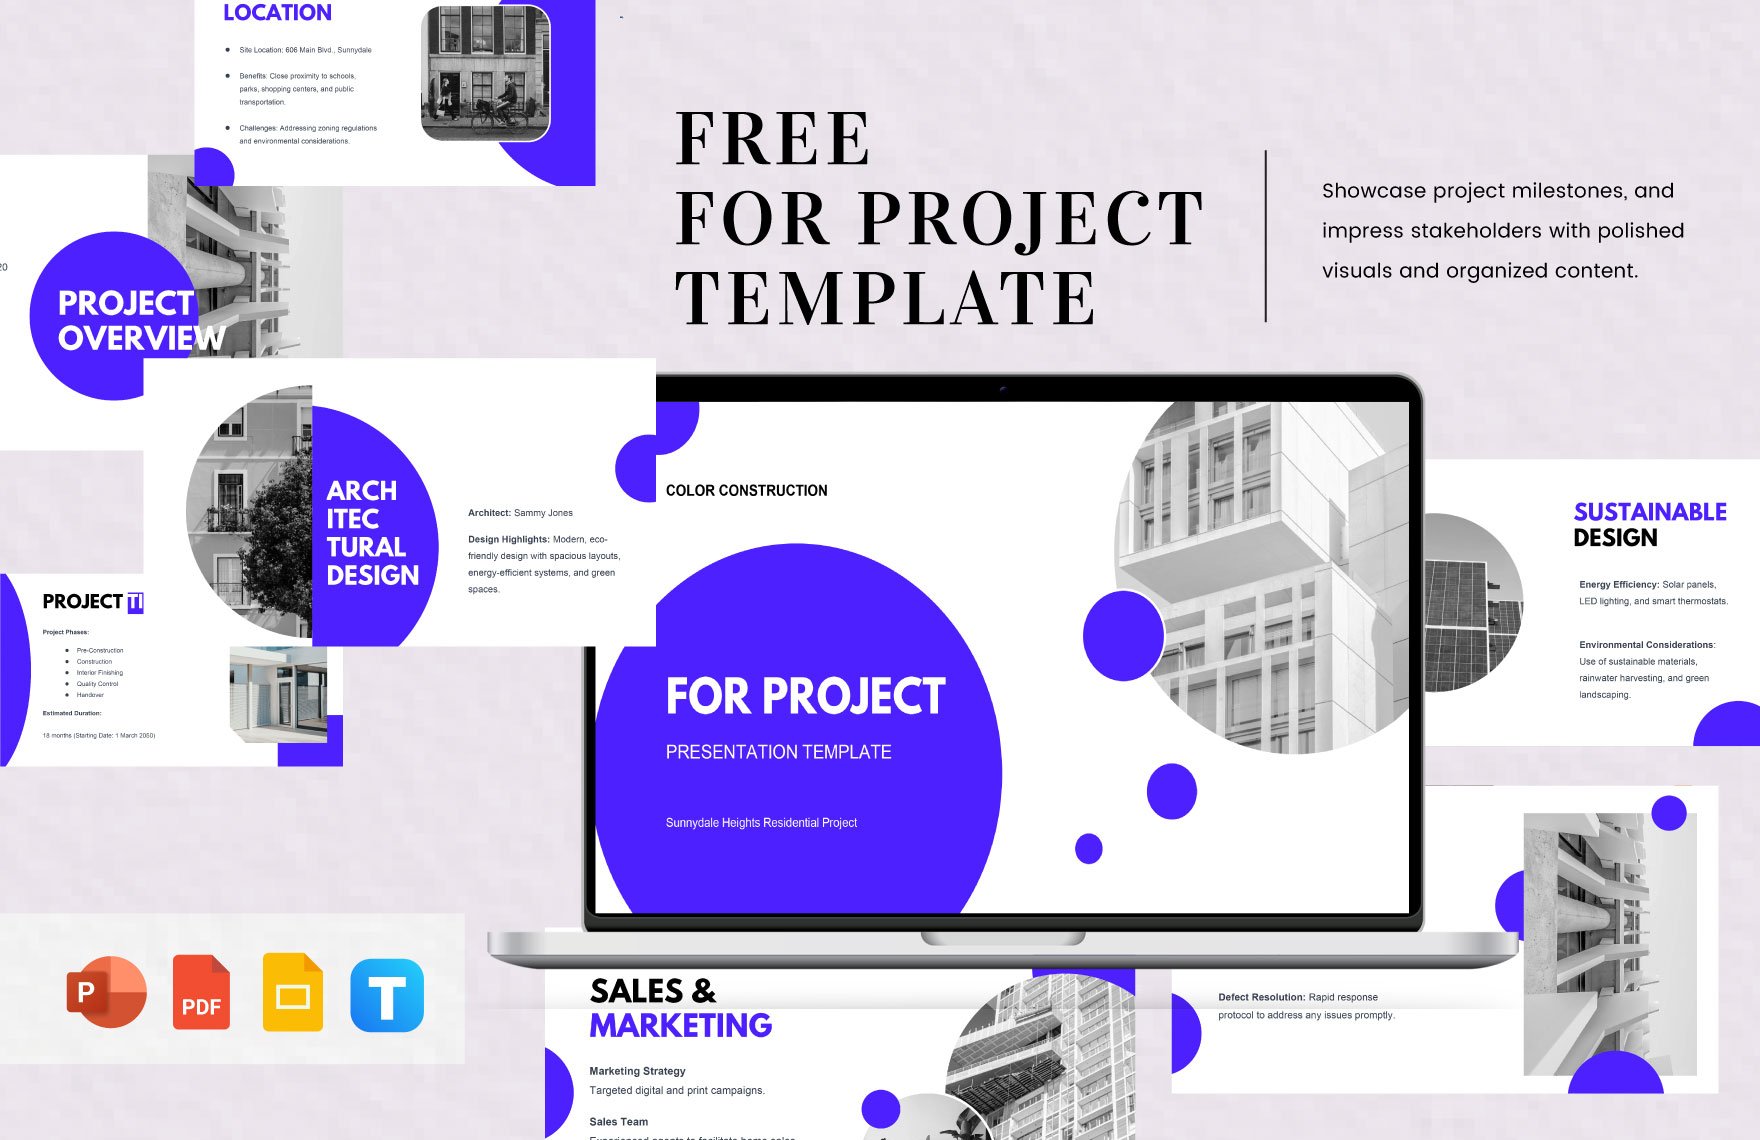 For Project Template